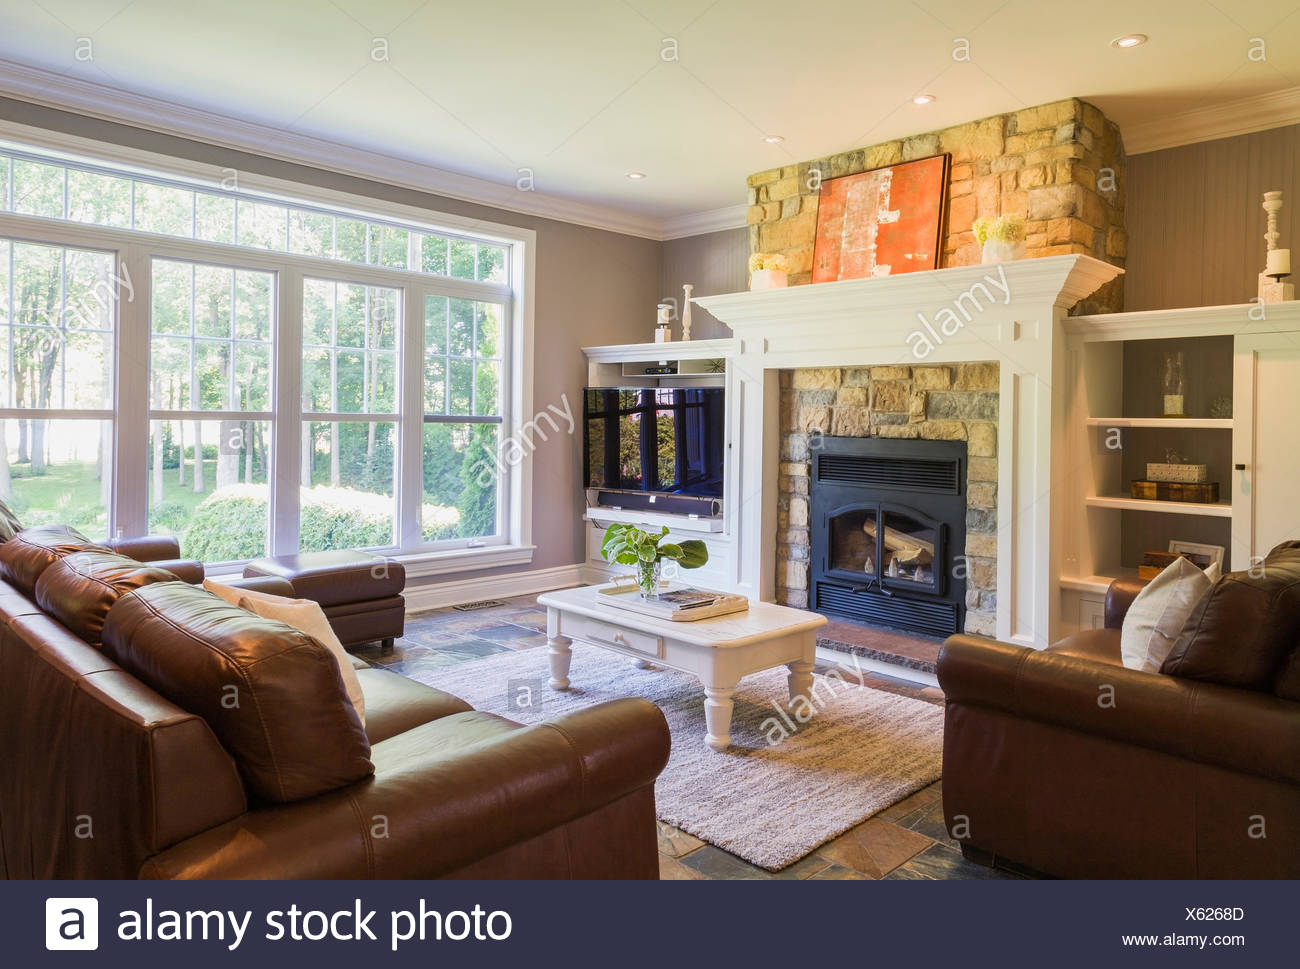 Brown Leather Sofa Sitting Chairs And Natural Stone Fireplace In The Living Room Inside A Cottage Style Home Quebec Canada Stock Photo Alamy